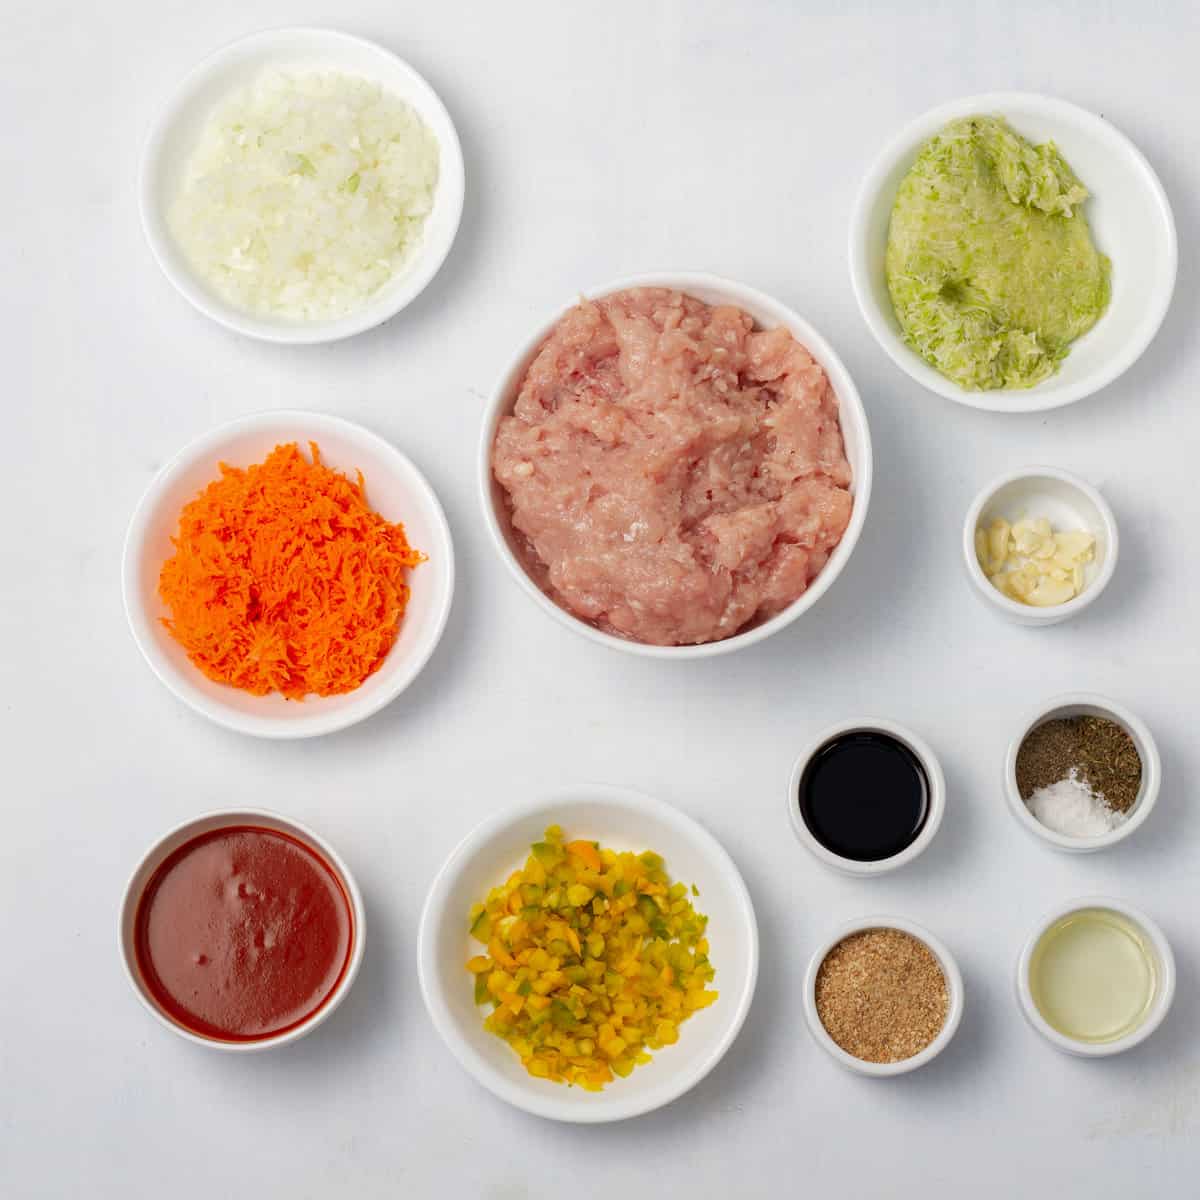 Ingredients of ground turkey, breadcrumbs, onion, garlic, carrot, zucchini, egg, sauce, and spices in separate dishes.